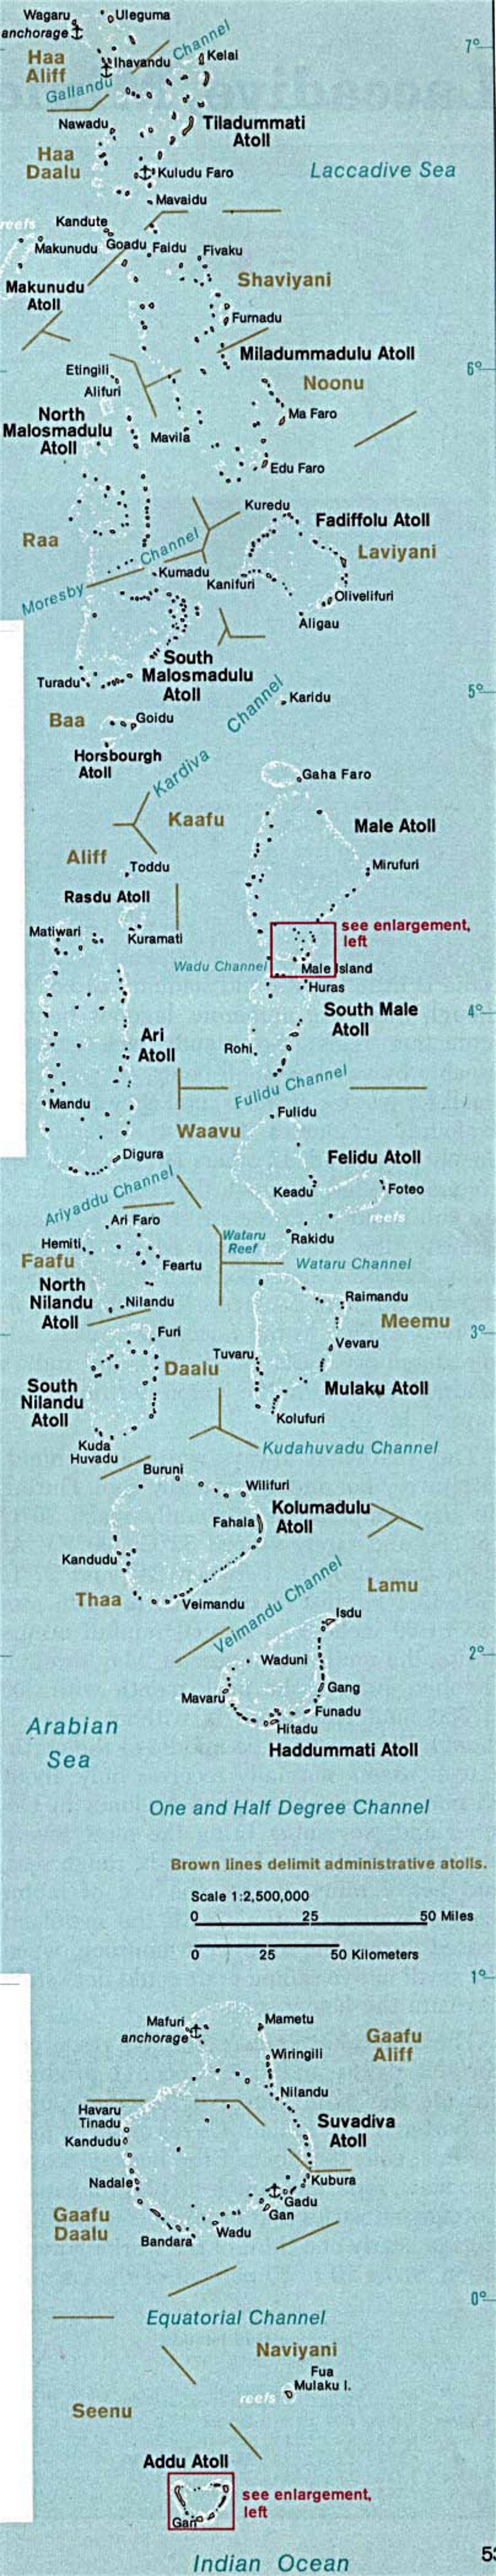 Detailed map of Maldives - 1976